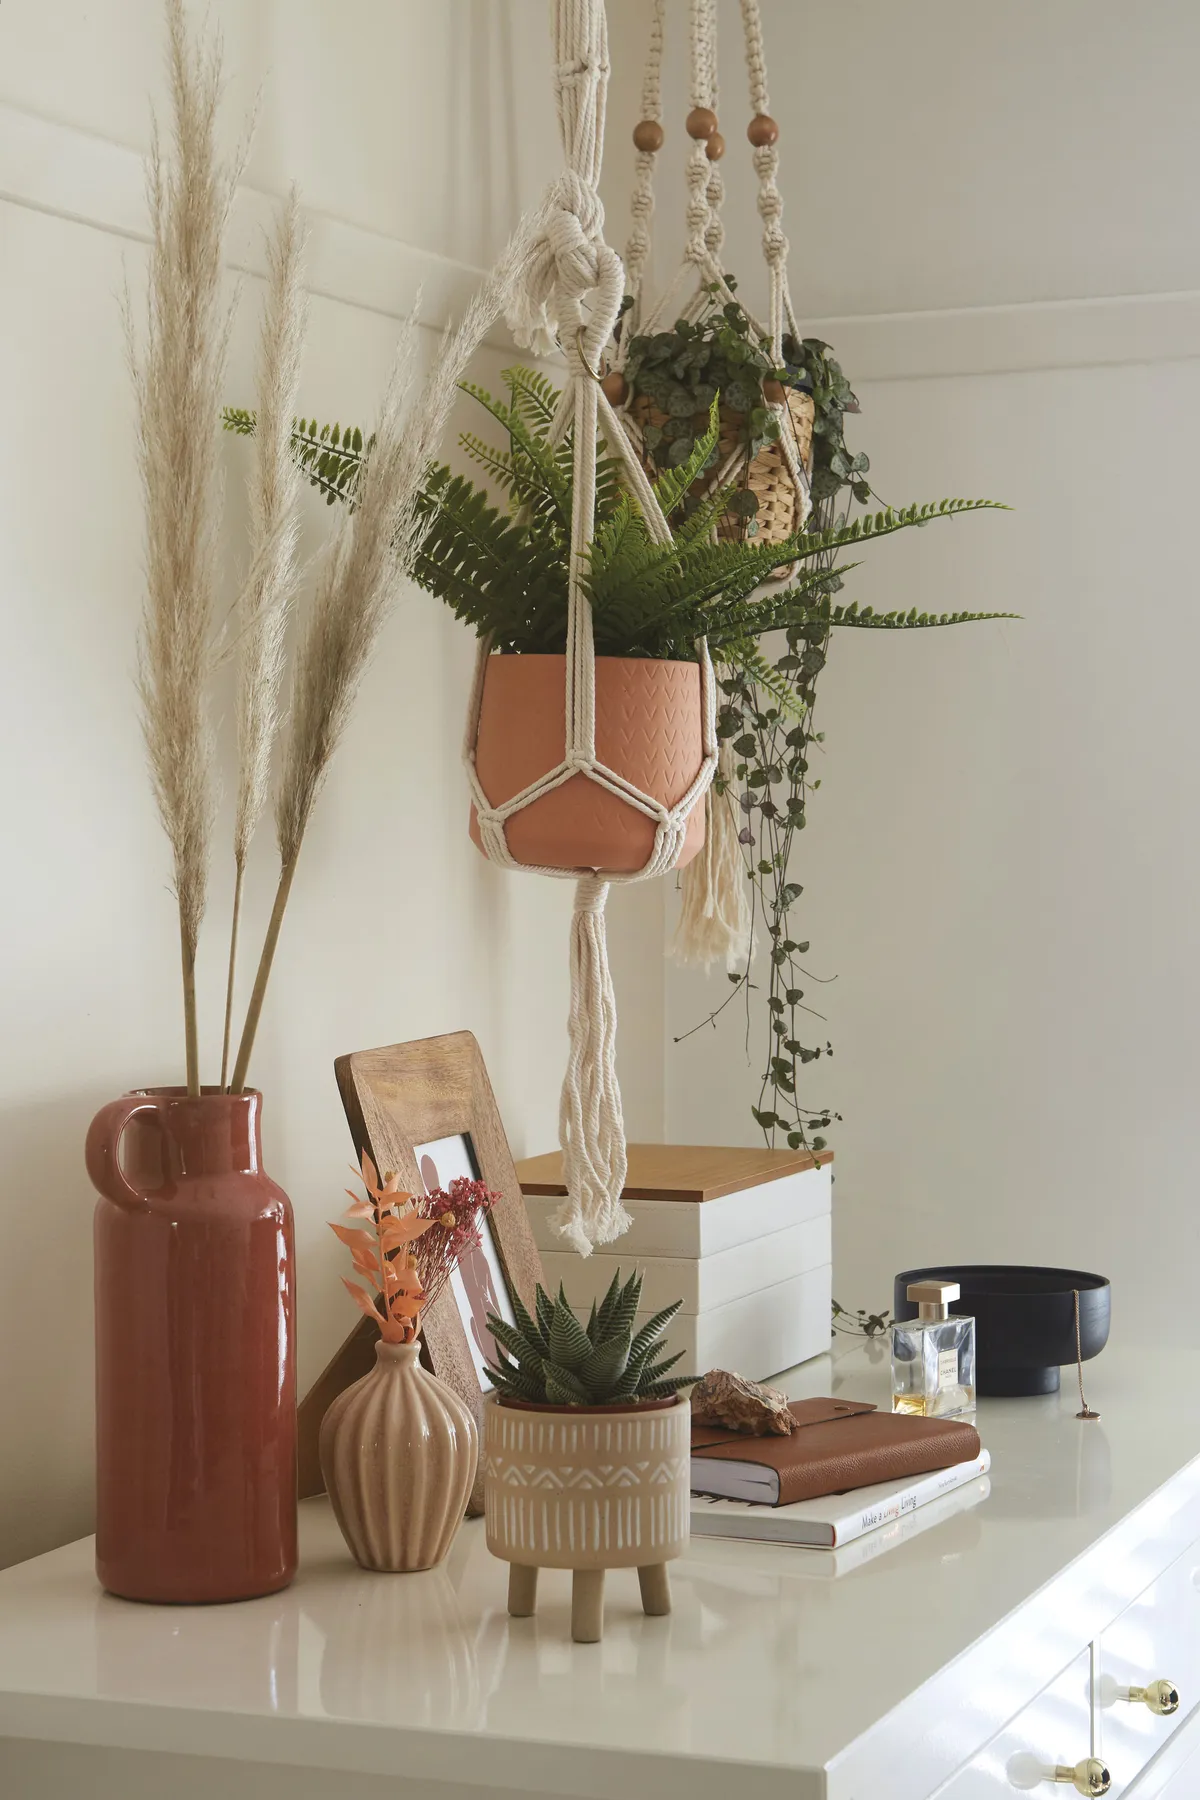 'I love natural textures and I think some of the bits I’ve chosen – such as the fringed wall hanging, woven baskets and macramé plant hangers – add a relaxed boho touch' says Laurie